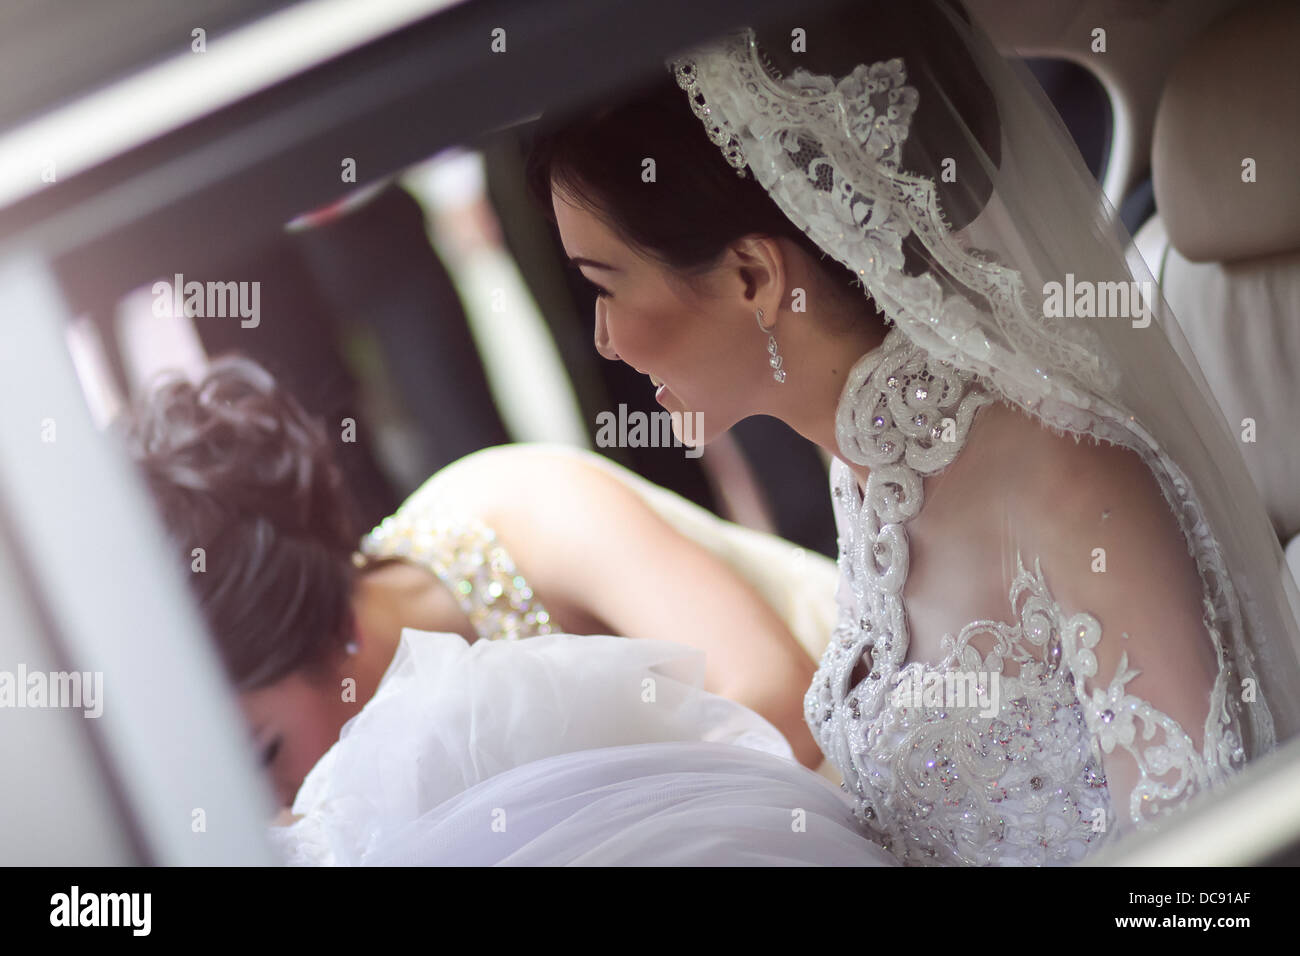 Bride sitting inside the passenger side of her wedding car while the bride's maid helping with her dress. Stock Photo